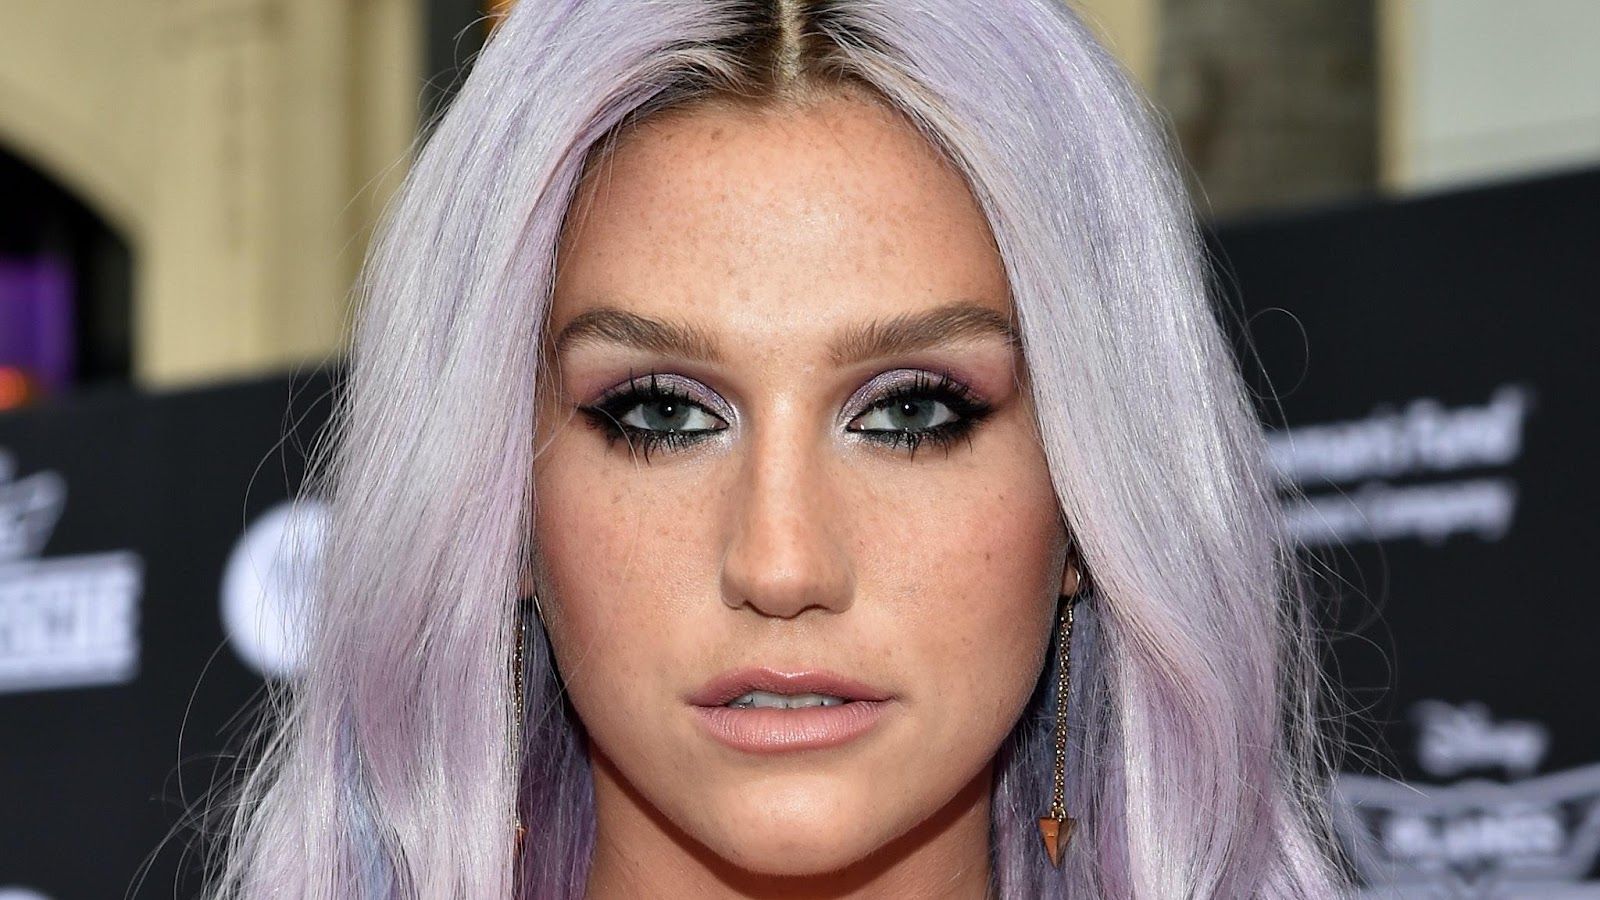 Singer/songwriter Kesha attends World Premiere Of Disney's "Planes: Fire & Rescue" at the El Capitan Theatre on July 15, 2014 in Hollywood, California.